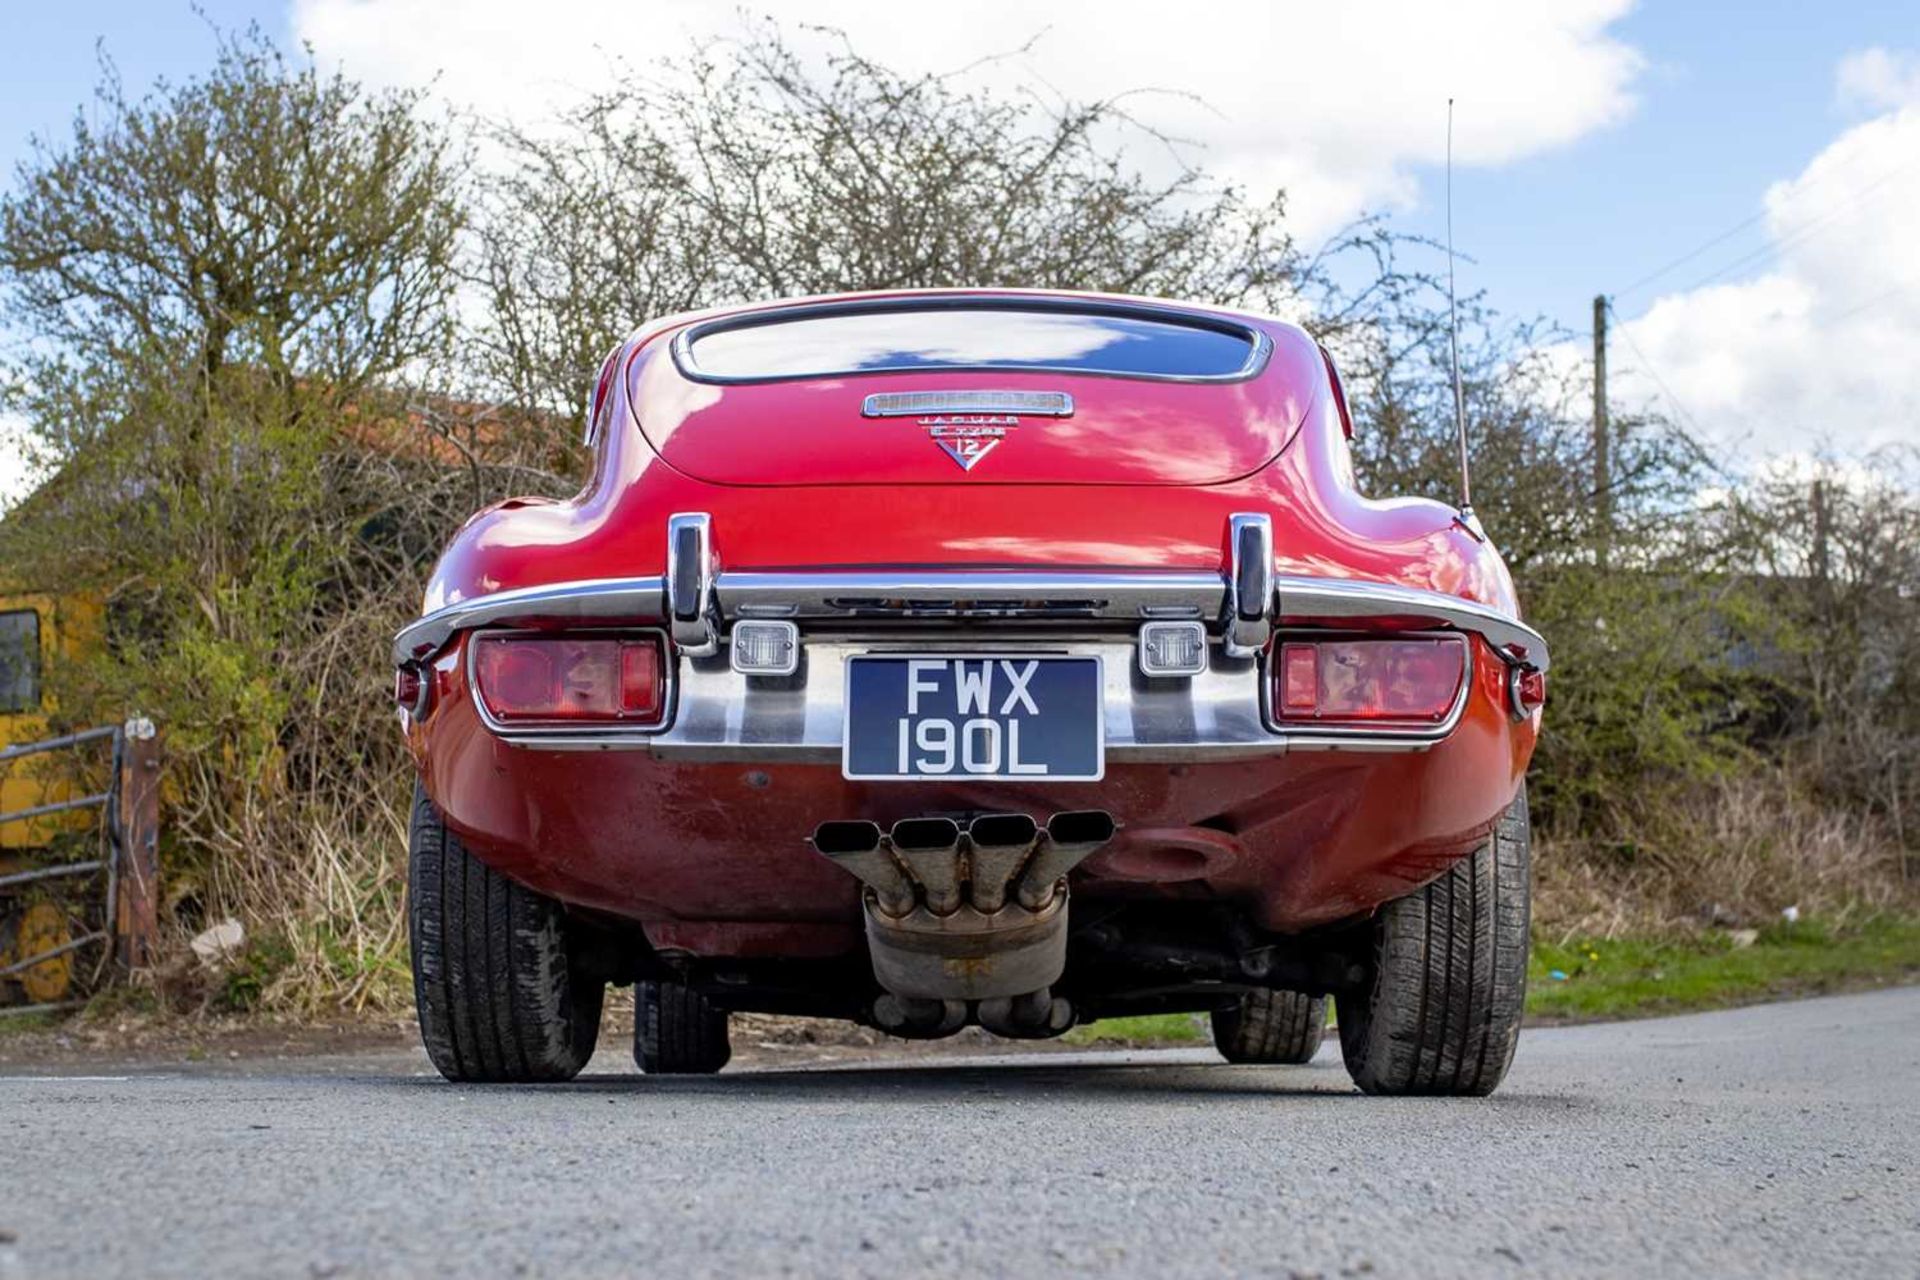 1973 Jaguar E-Type Coupe 5.3 V12 Three owners from new - Image 6 of 79